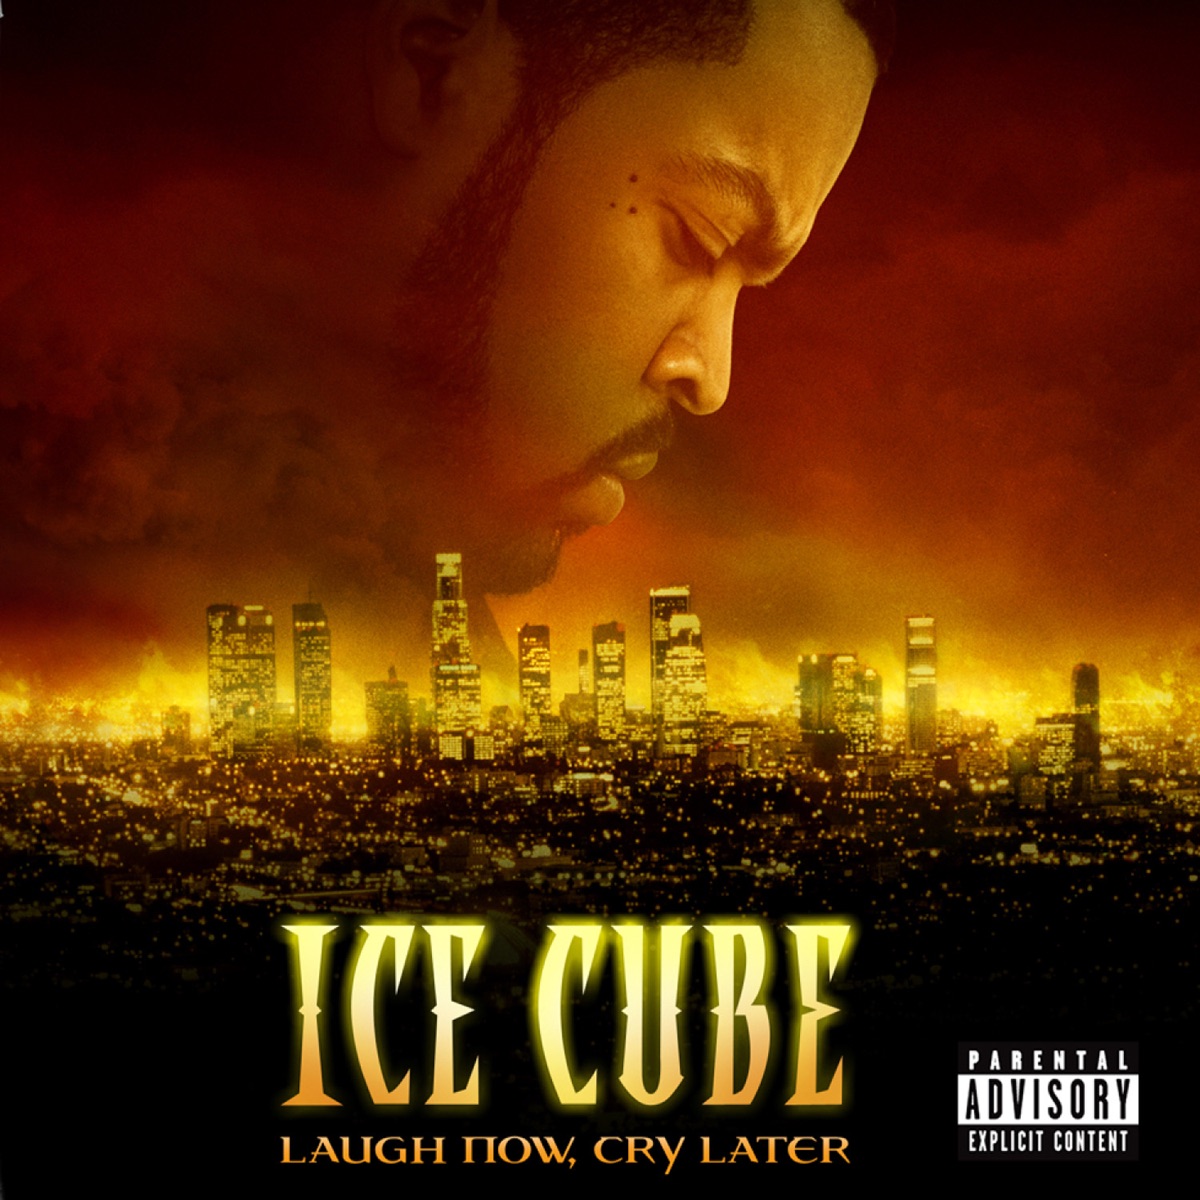 I Am the West by Ice Cube on Apple Music